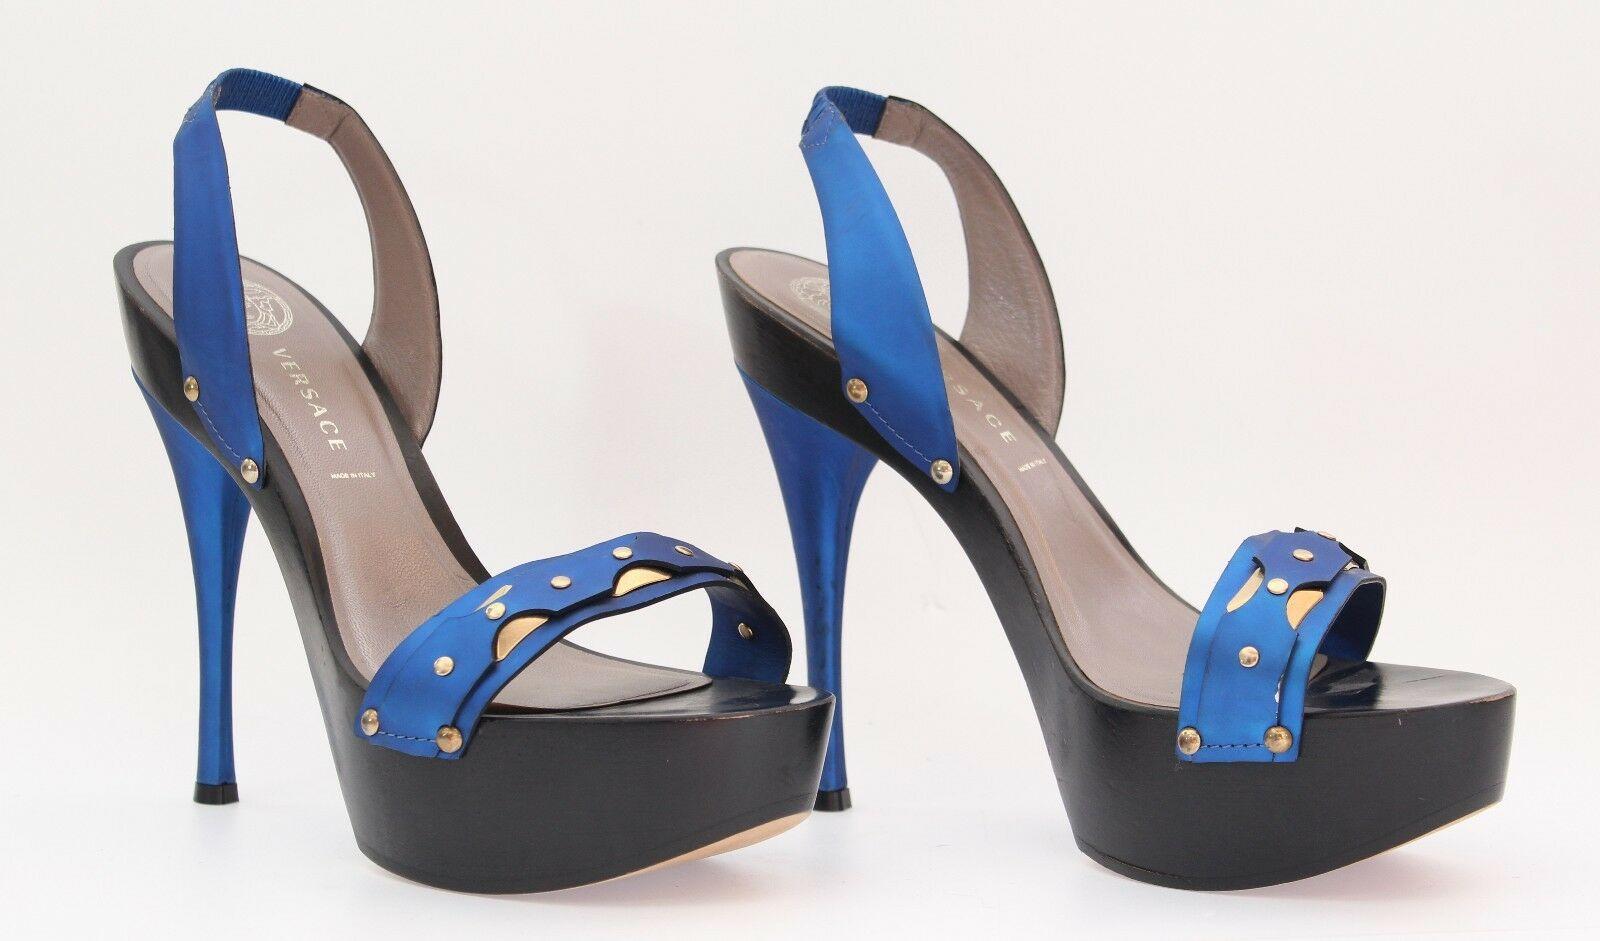 New VERSACE BLUE METALLIC LEATHER STUDDED PLATFORM SANDALS 40 - 10 In New Condition For Sale In Montgomery, TX